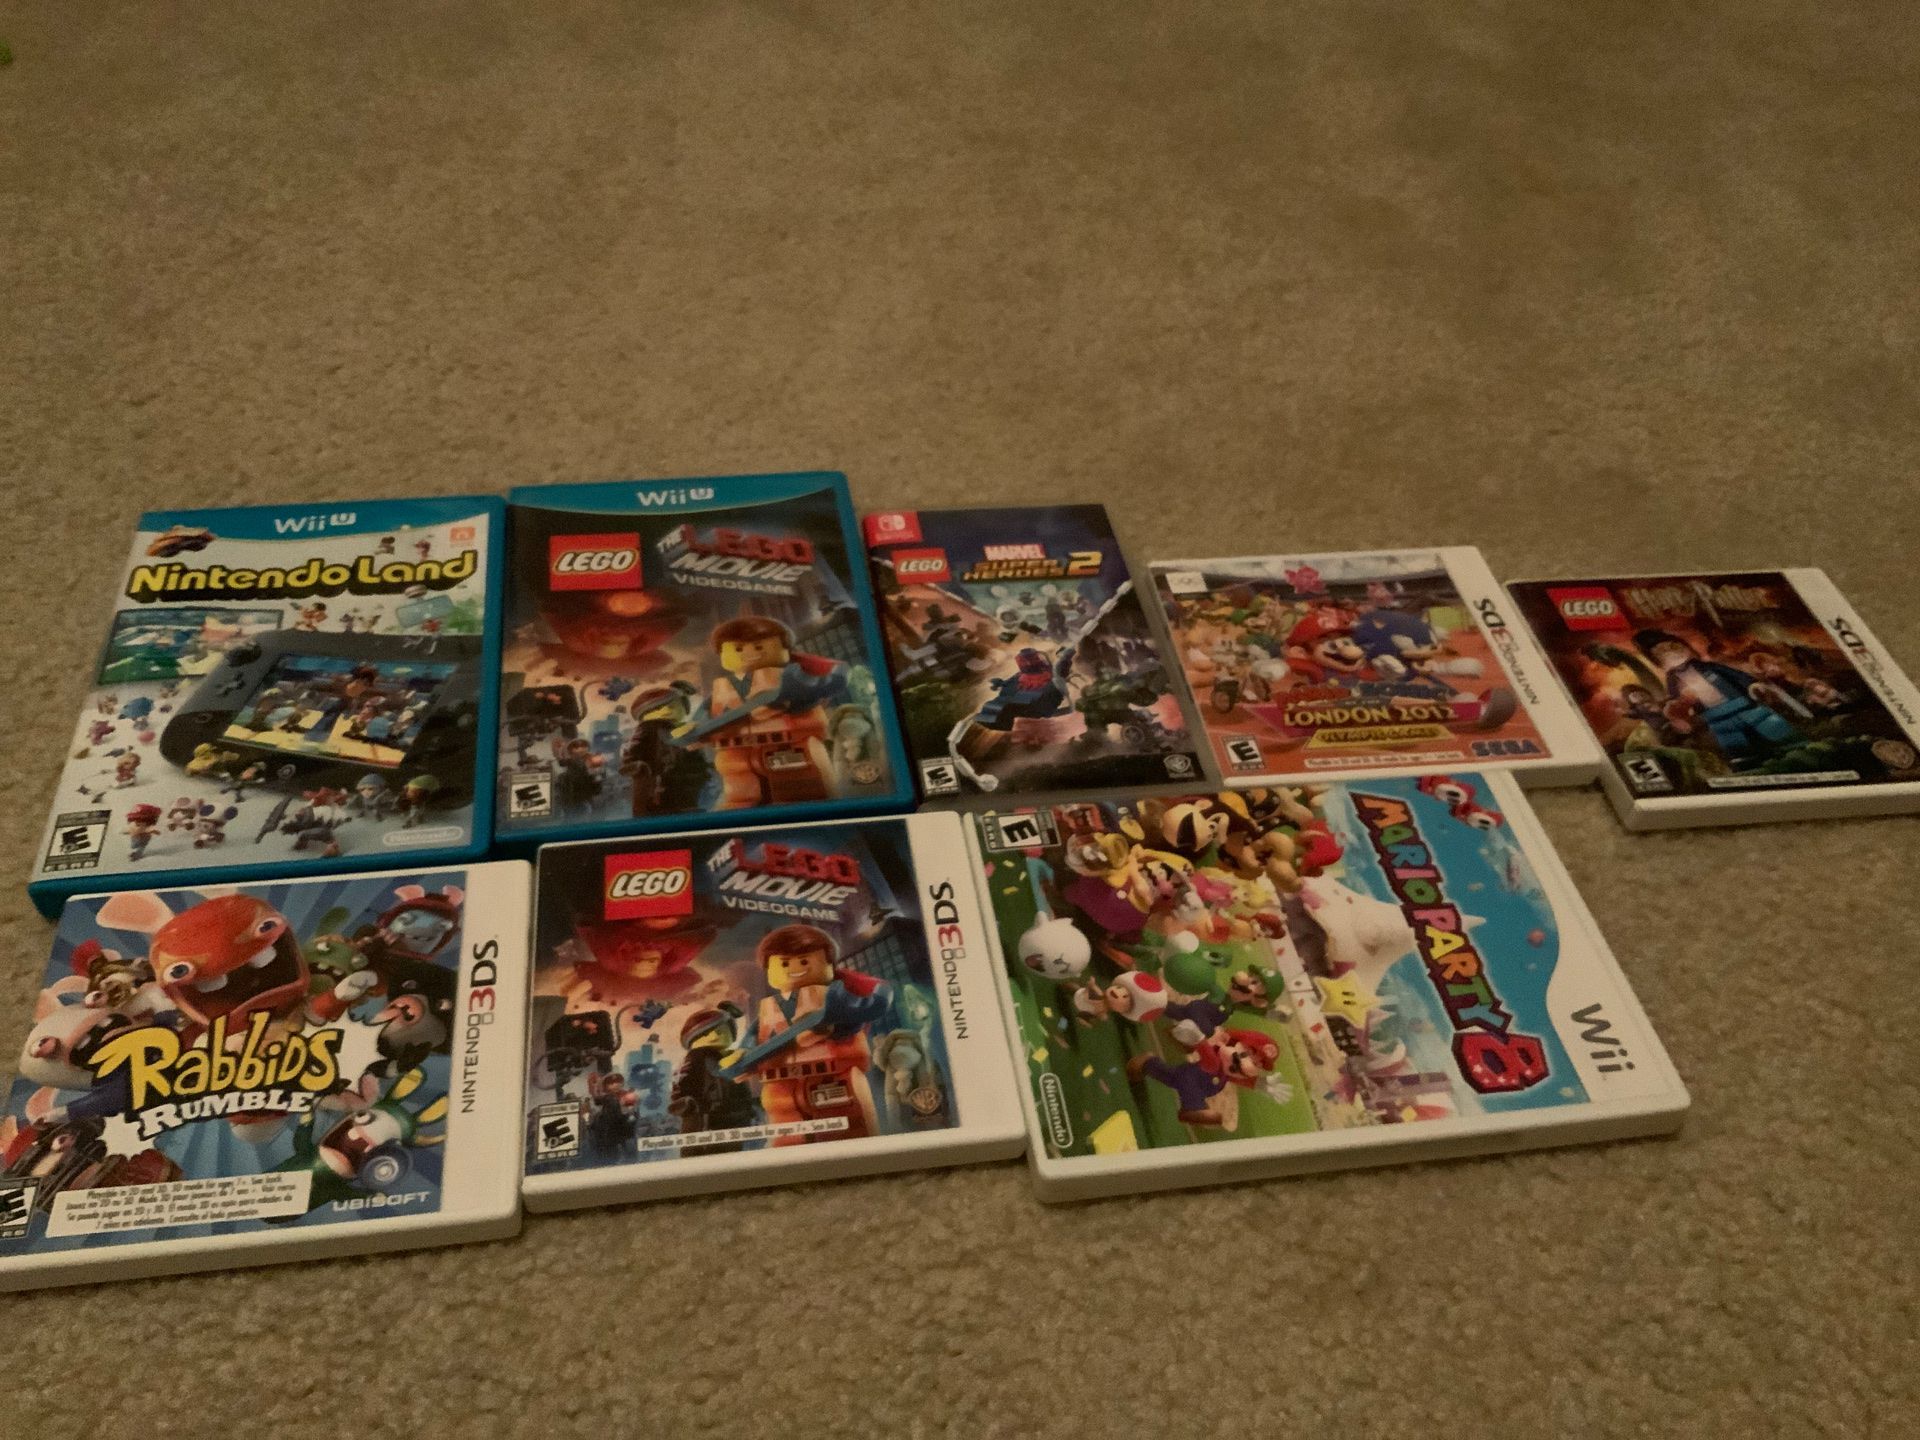 Super Nintendo bundle: 8 Nintendo games! (Wii U, 3ds, Wii, and Switch) (Used)